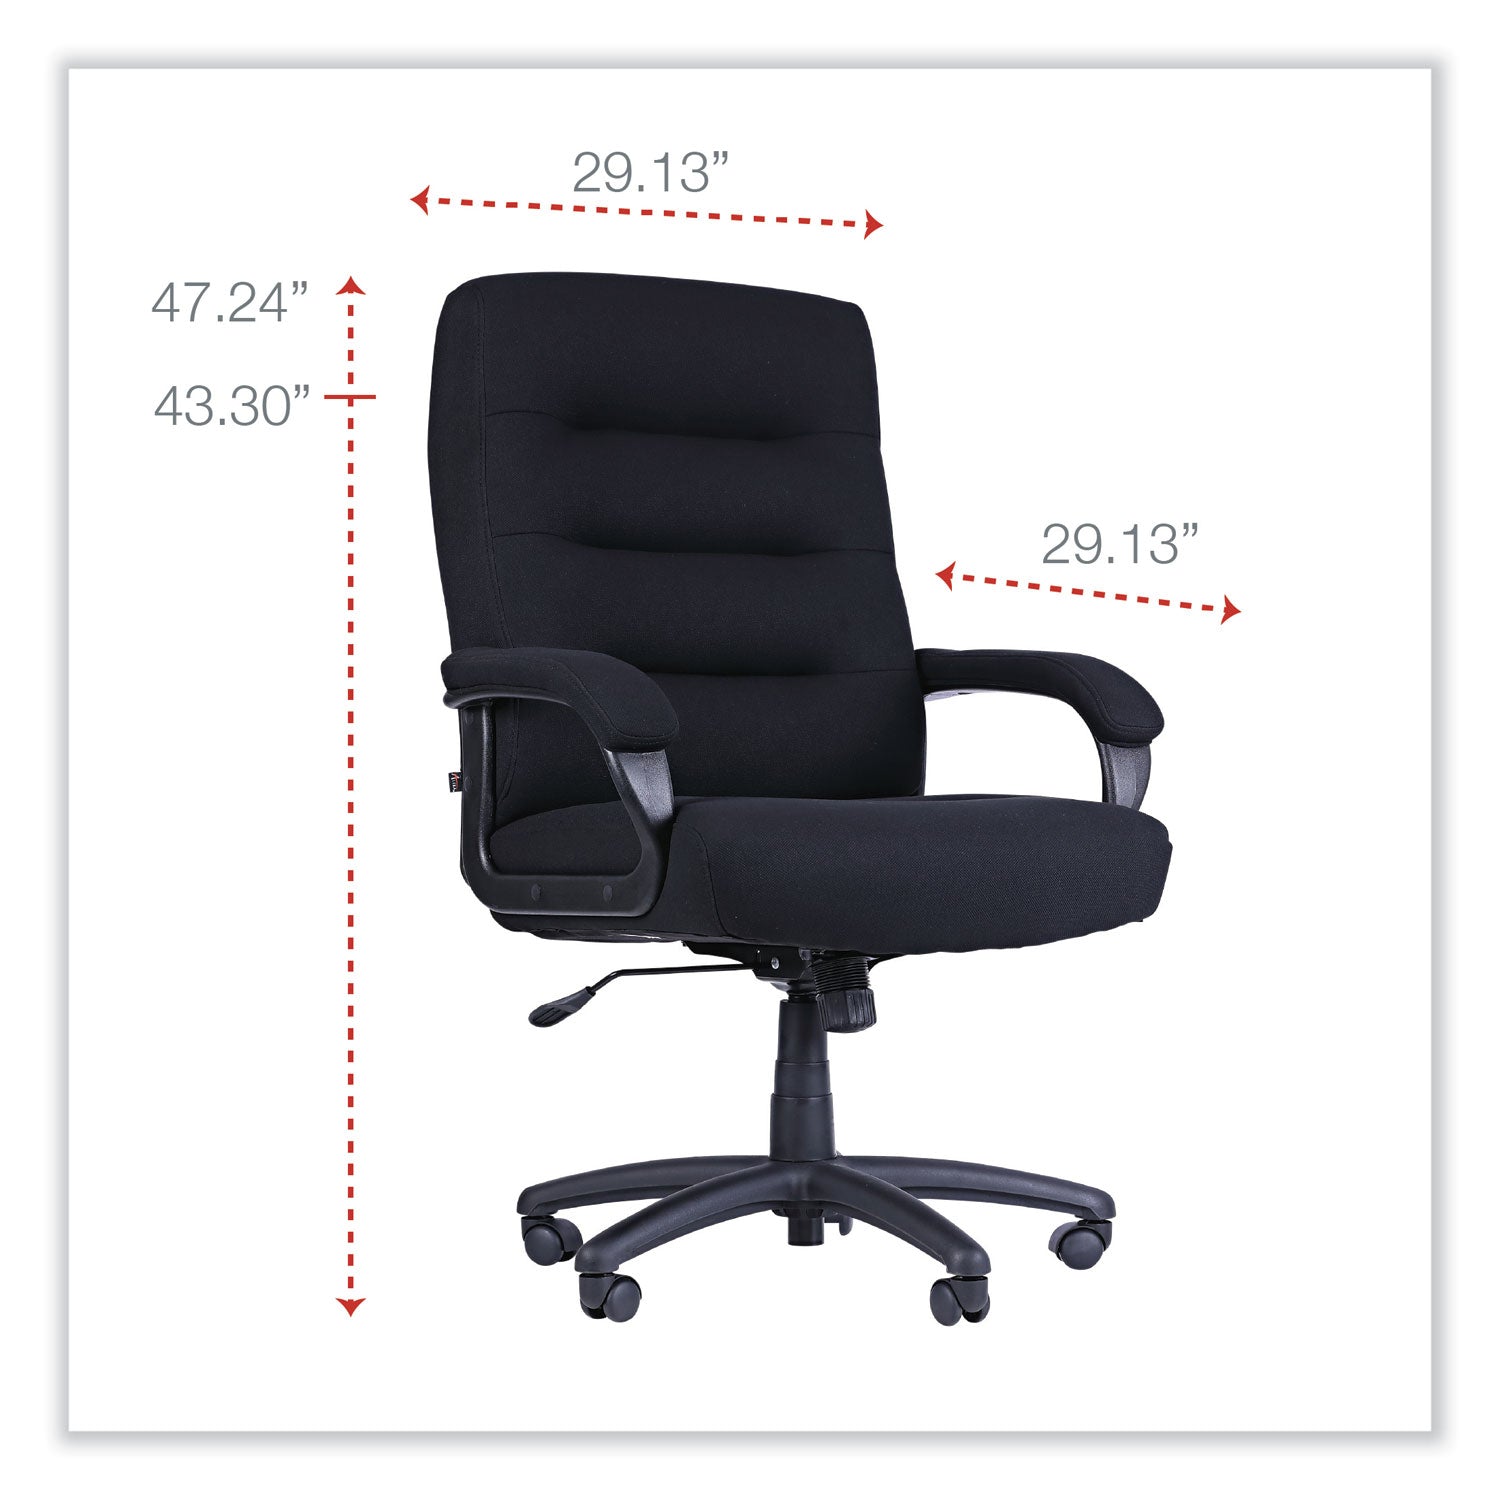 alera-kesson-series-high-back-office-chair-supports-up-to-300-lb-1921-to-227-seat-height-black_aleks4110 - 2